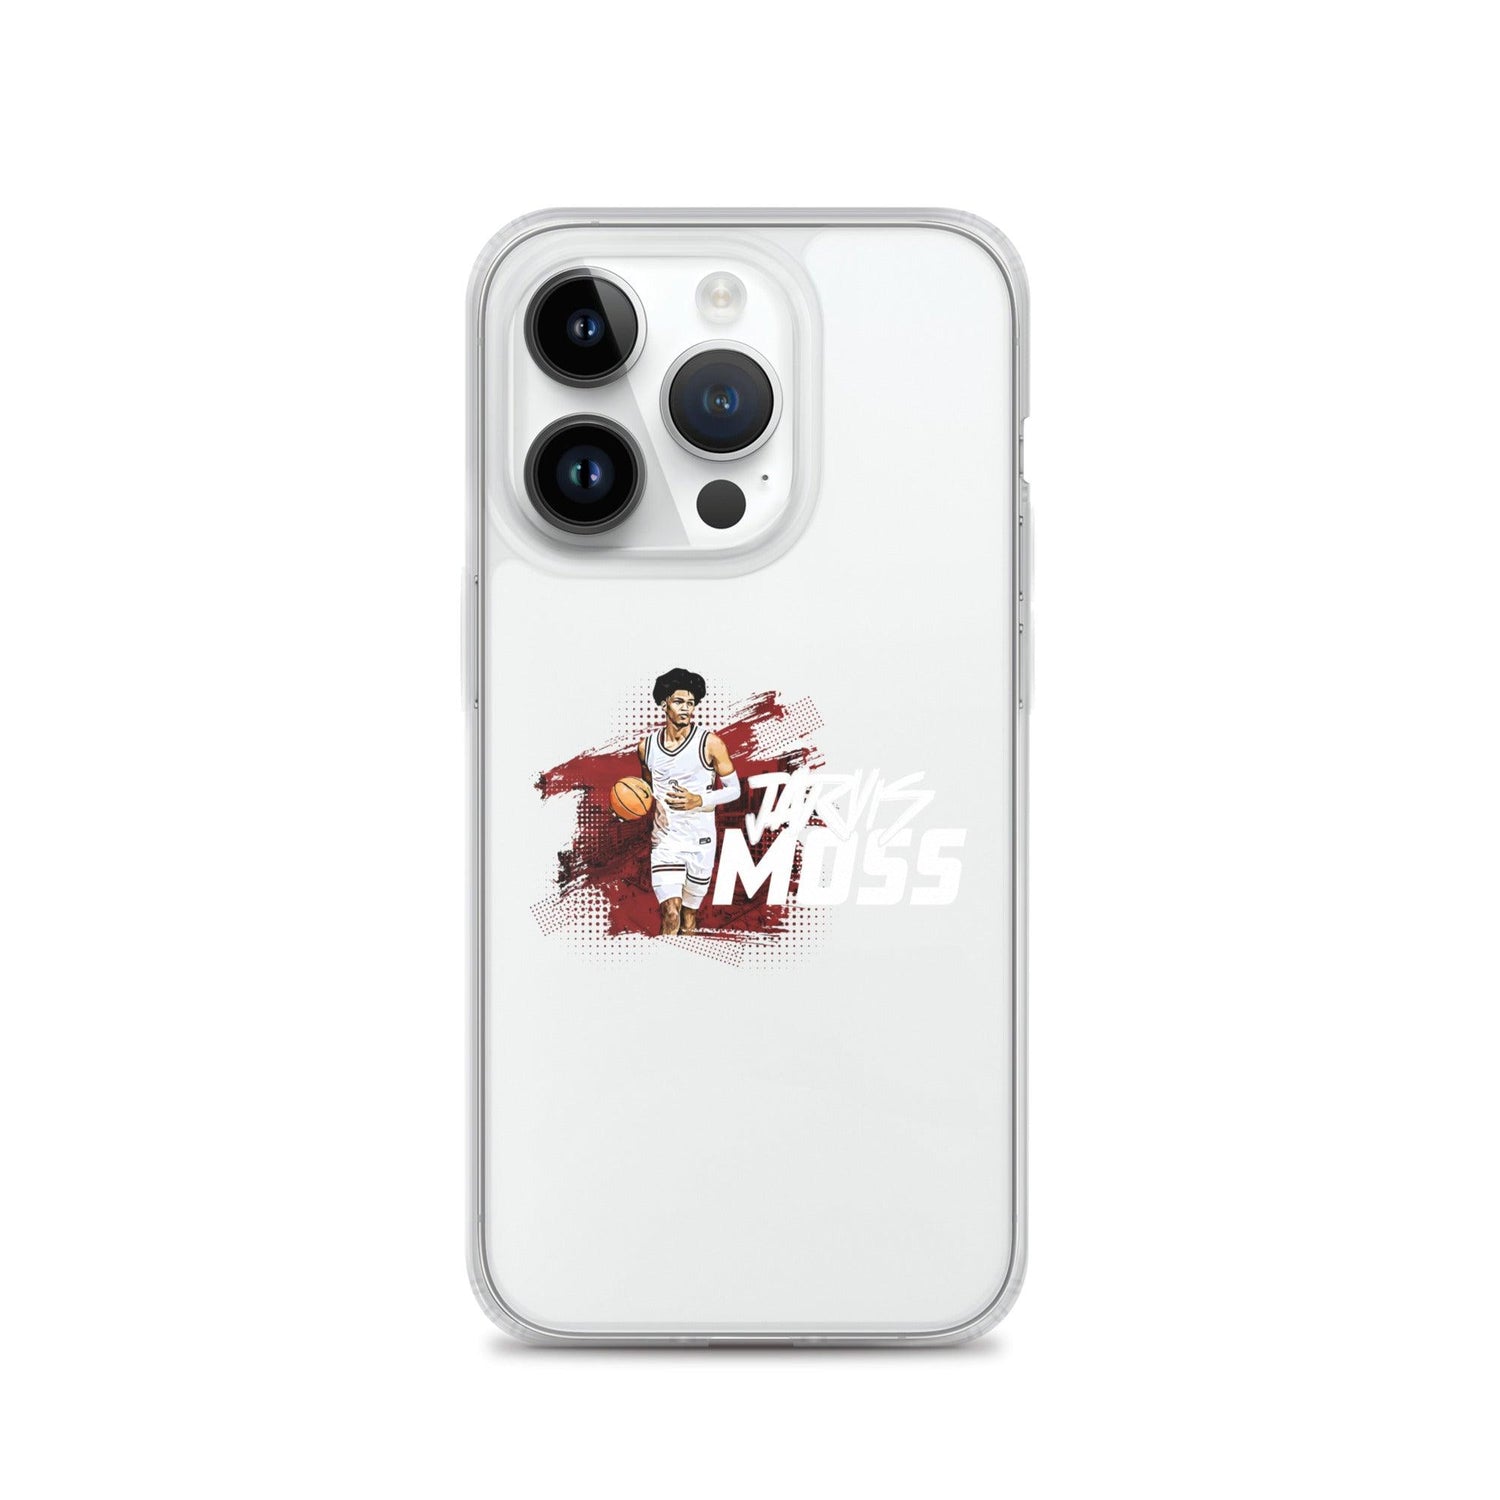 Jarvis Moss "Gameday" iPhone® - Fan Arch